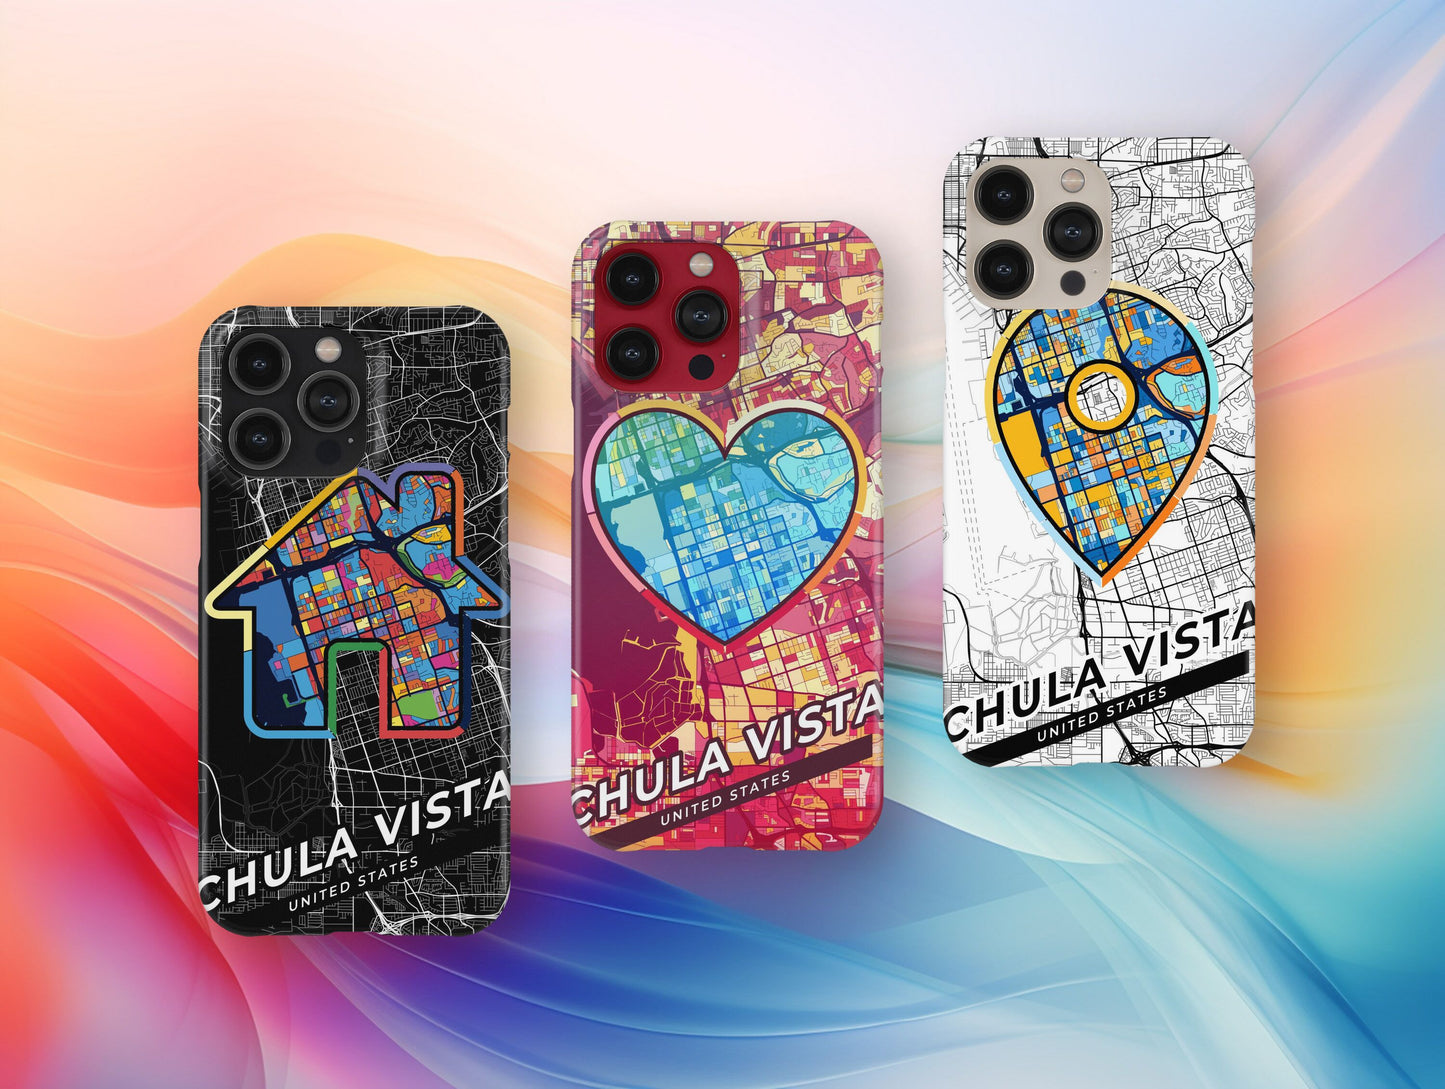 Chula Vista California slim phone case with colorful icon. Birthday, wedding or housewarming gift. Couple match cases.